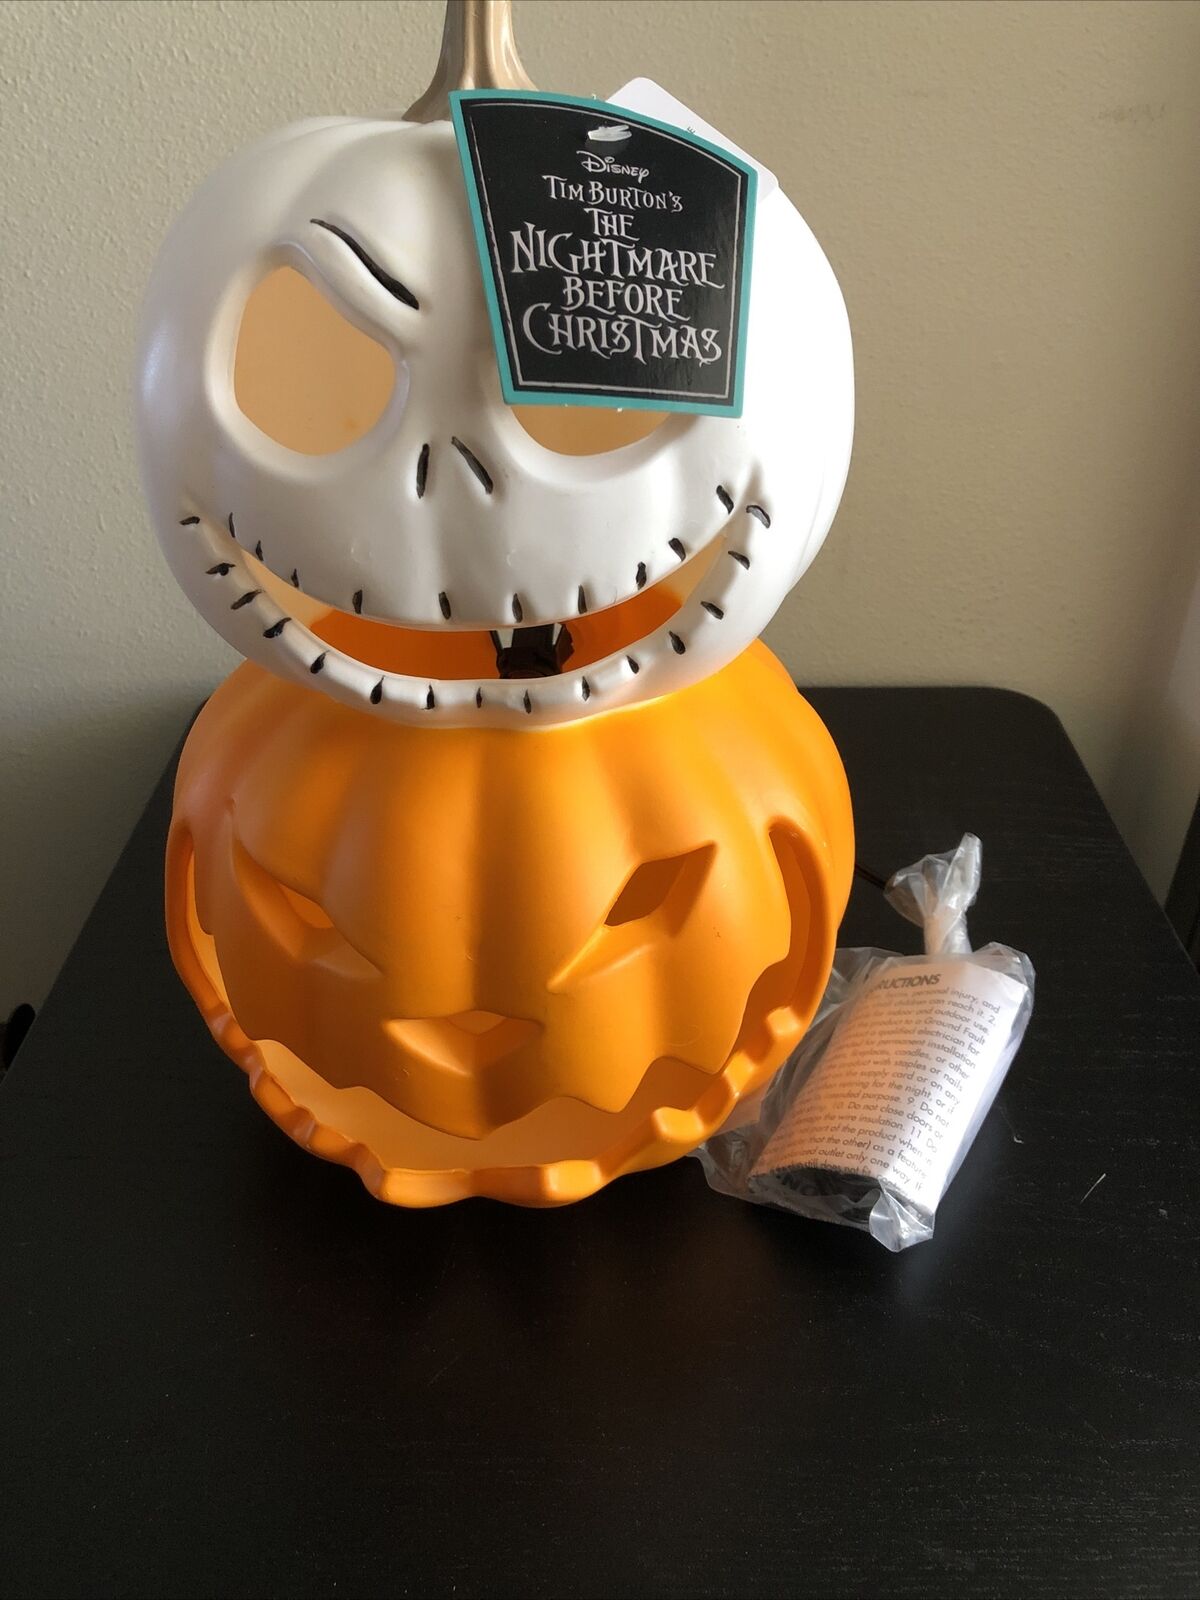 The Nightmare Before Christmas Light-Up Pumpkin Stack